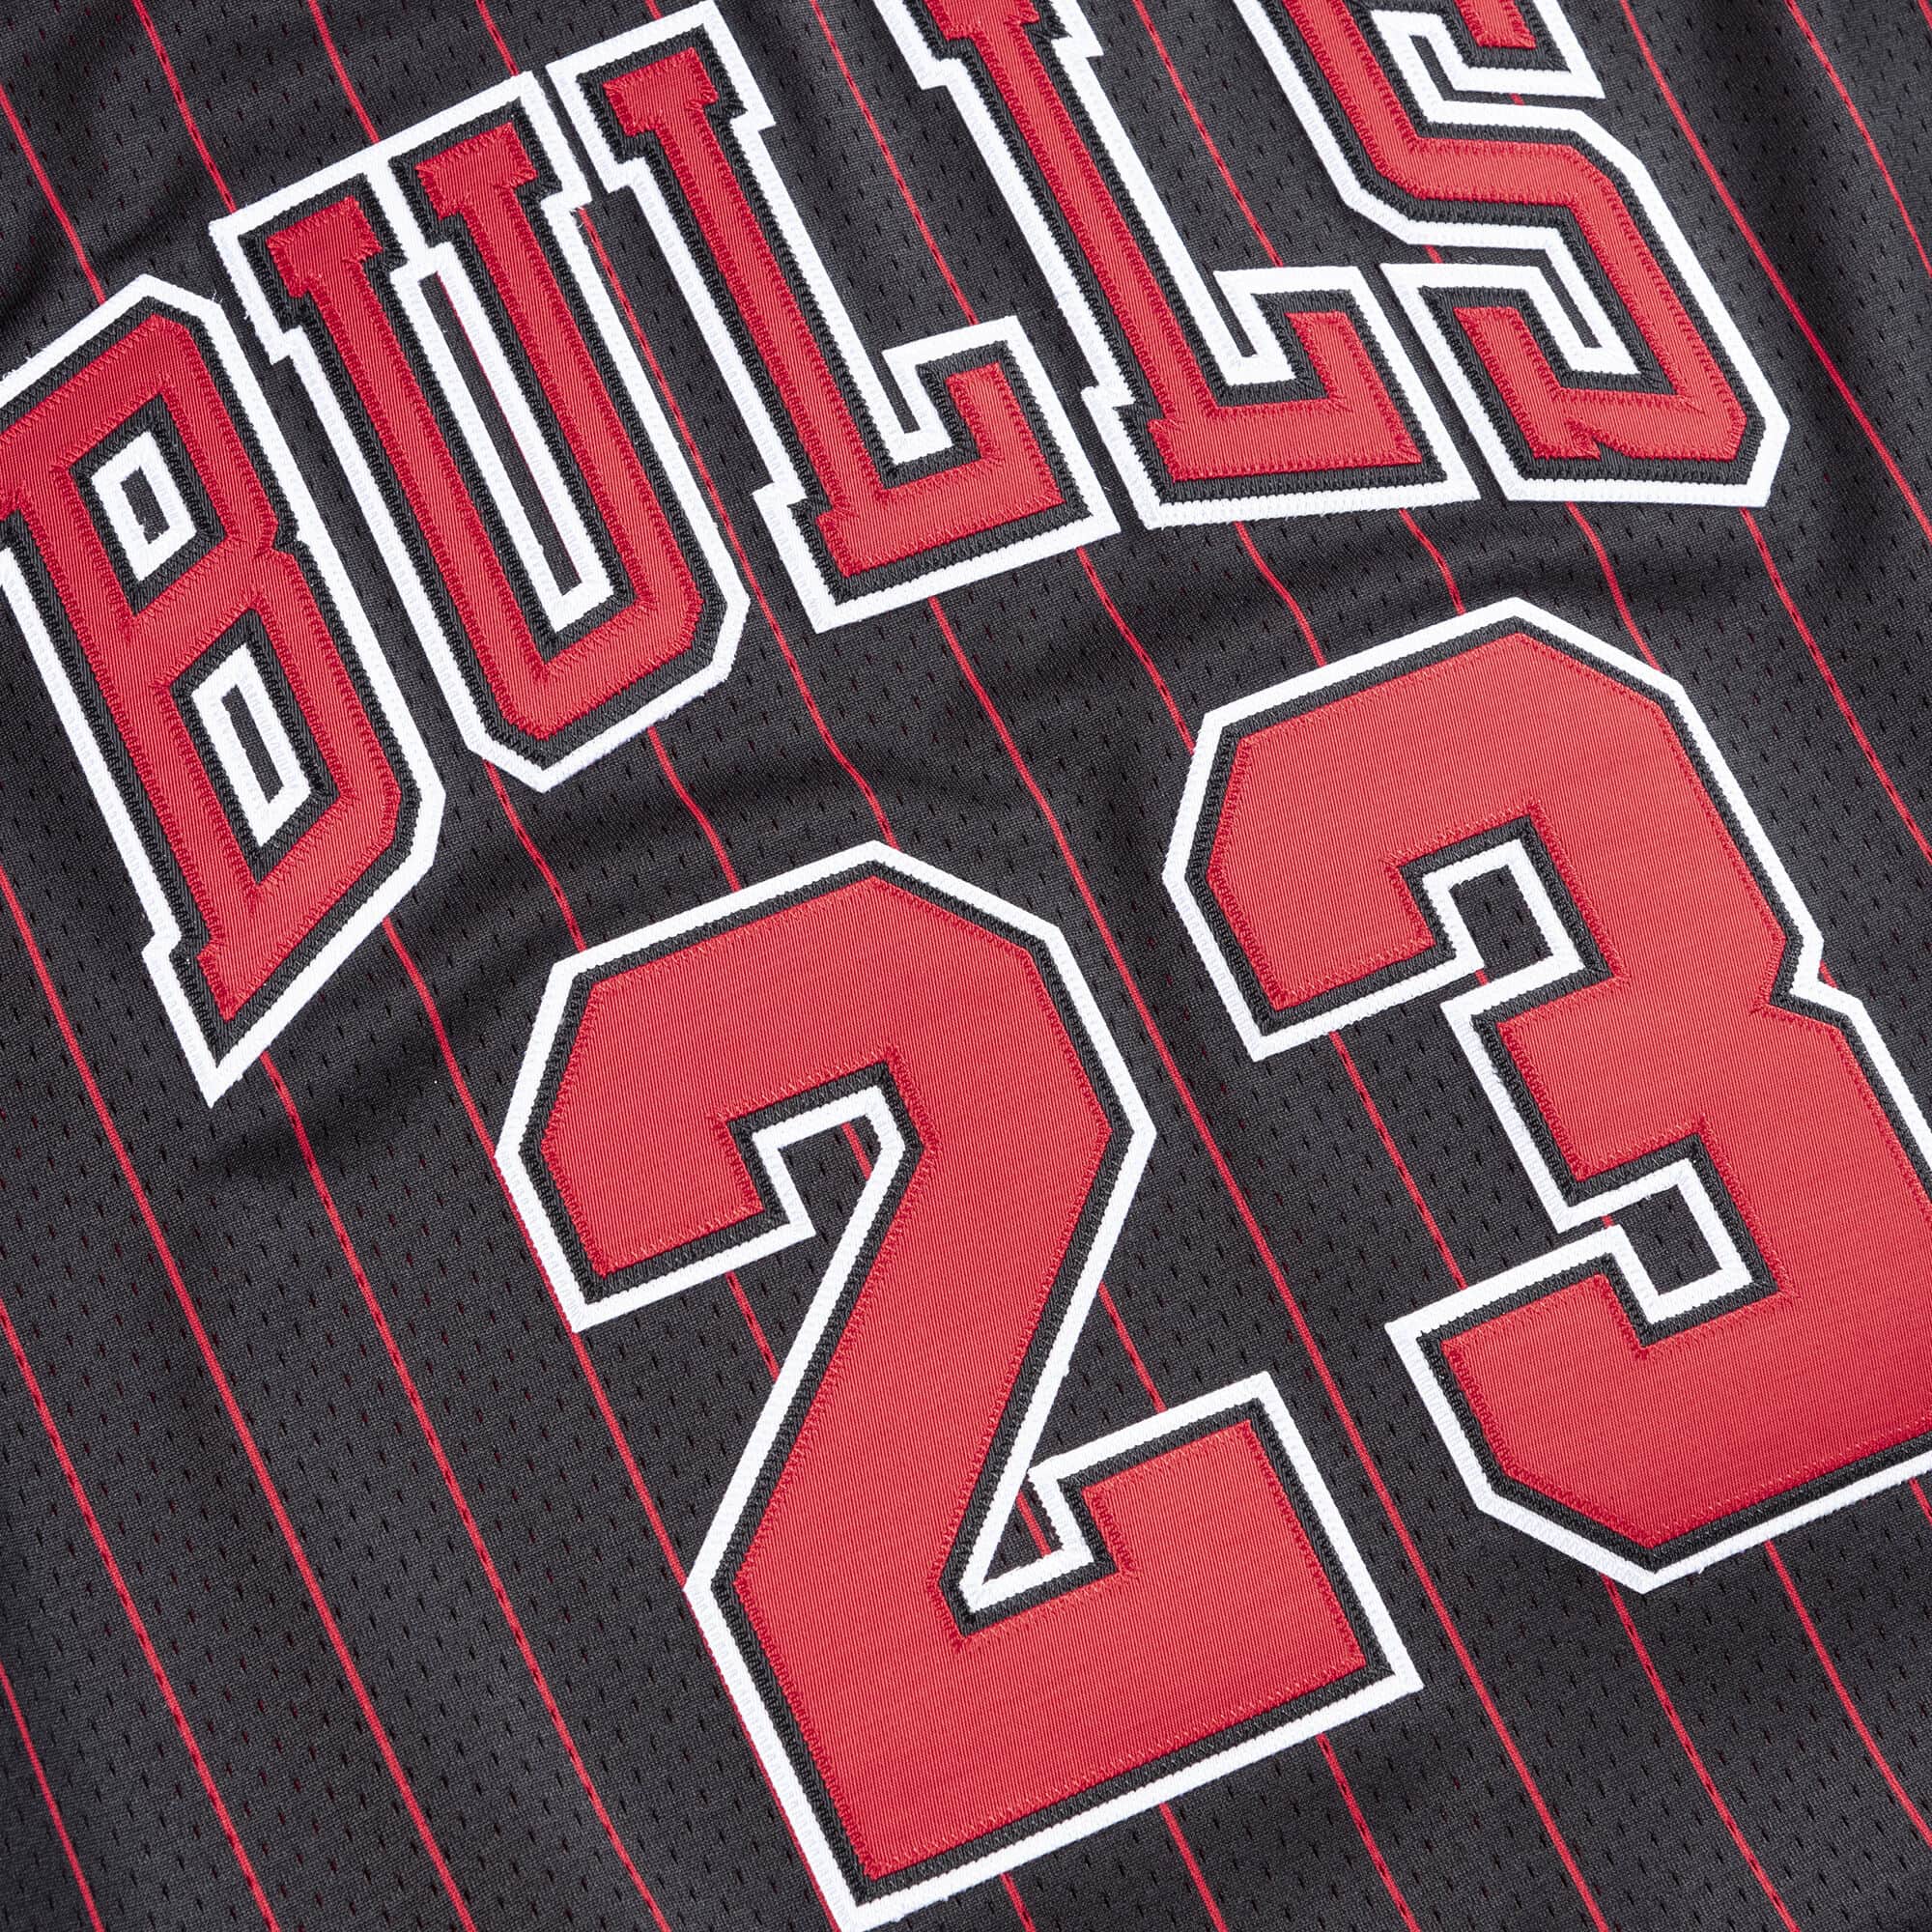 SOLELINKS on X: Ad: 25% off Mitchell & Ness Michael Jordan Chicago  Bulls Authentic Jerseys, discount applied in cart SHOP =>    / X